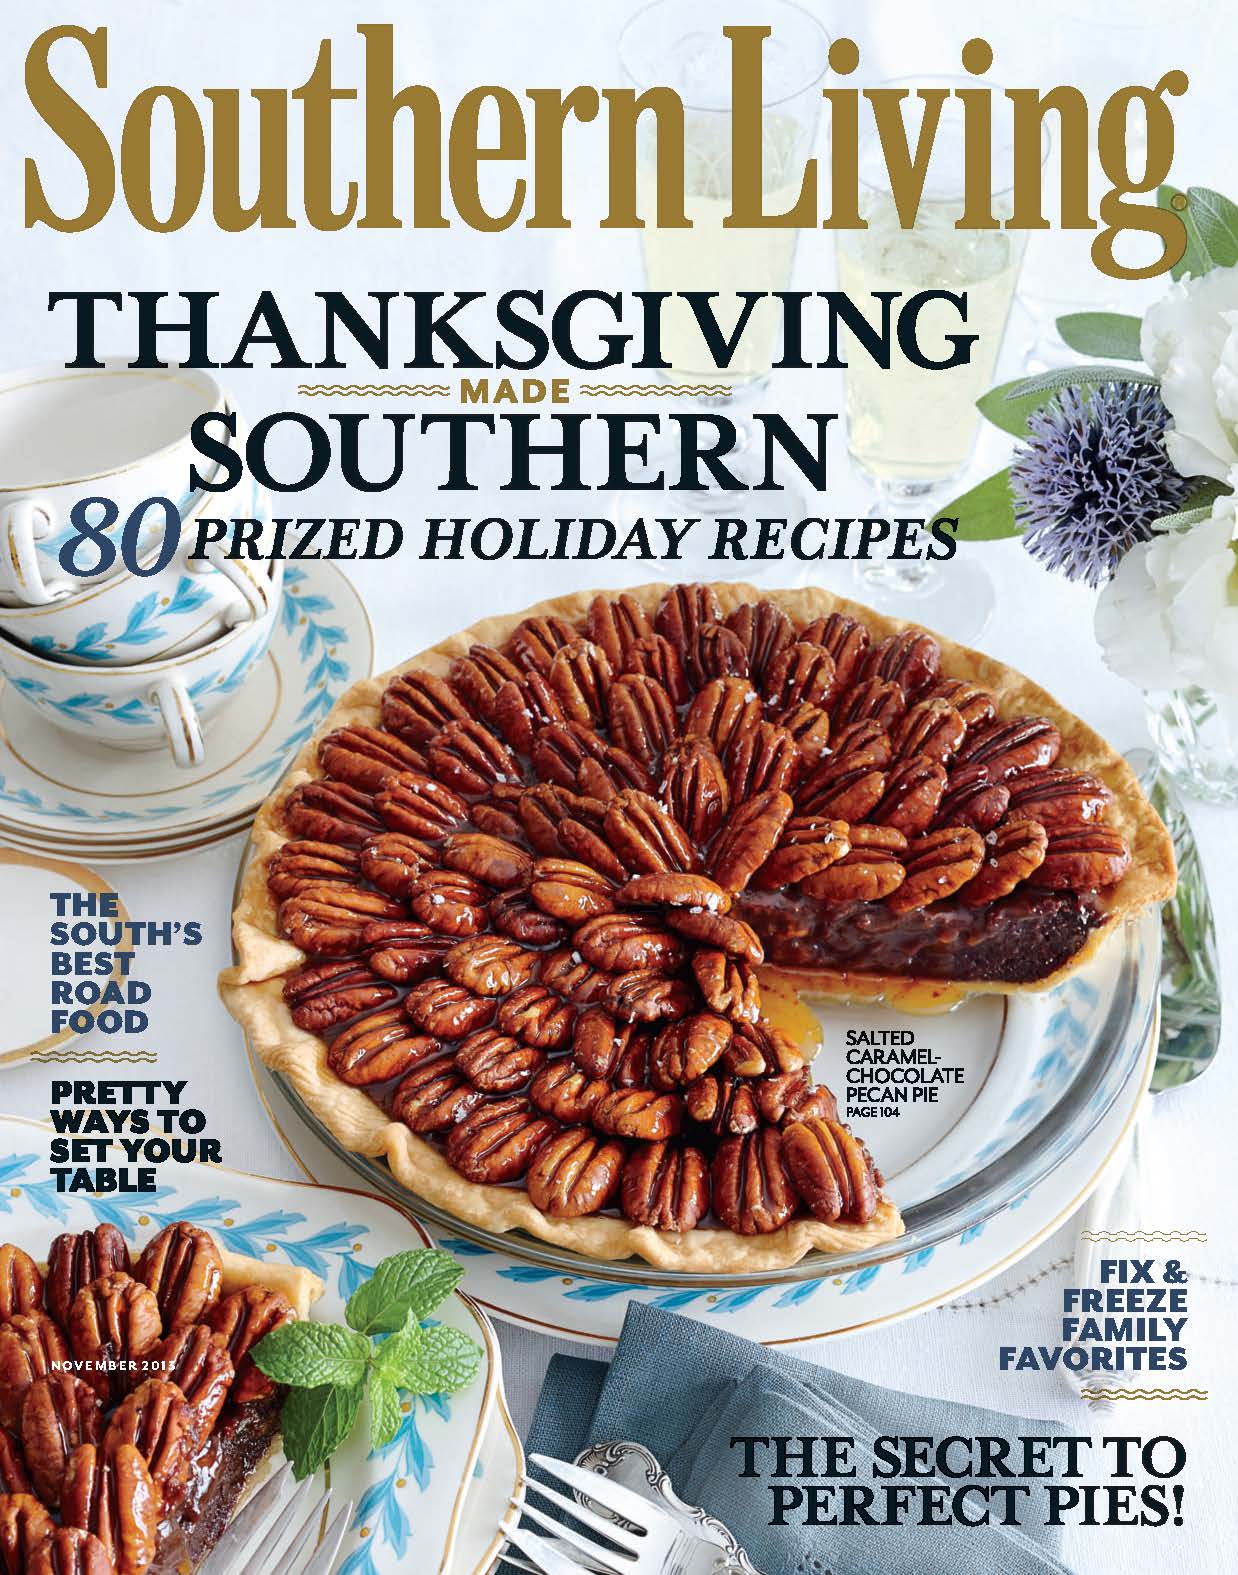 Southern Living Magazine Images Pictures   Becuo